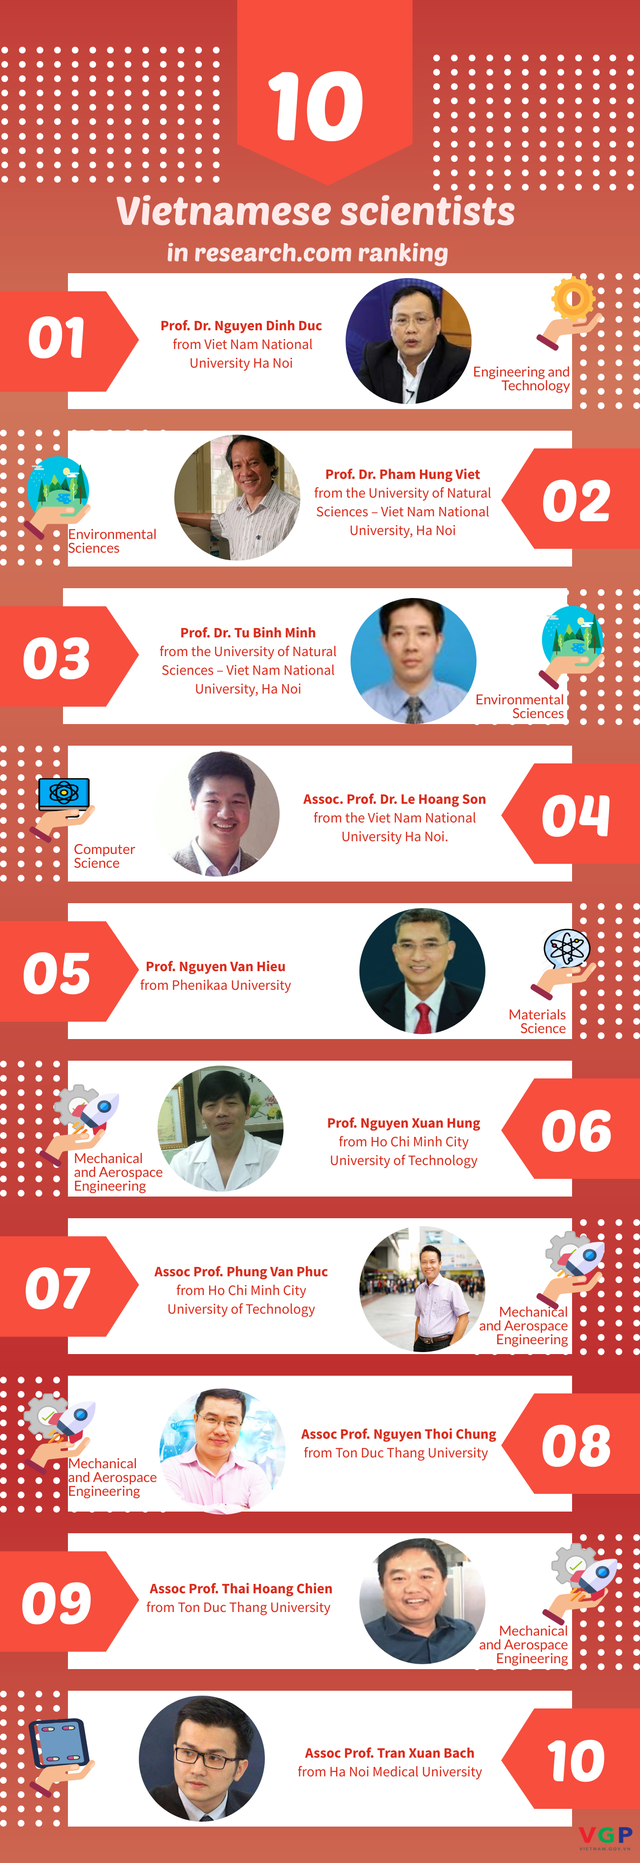 Ten Vietnamese scientists listed in research.com ranking - Ảnh 1.